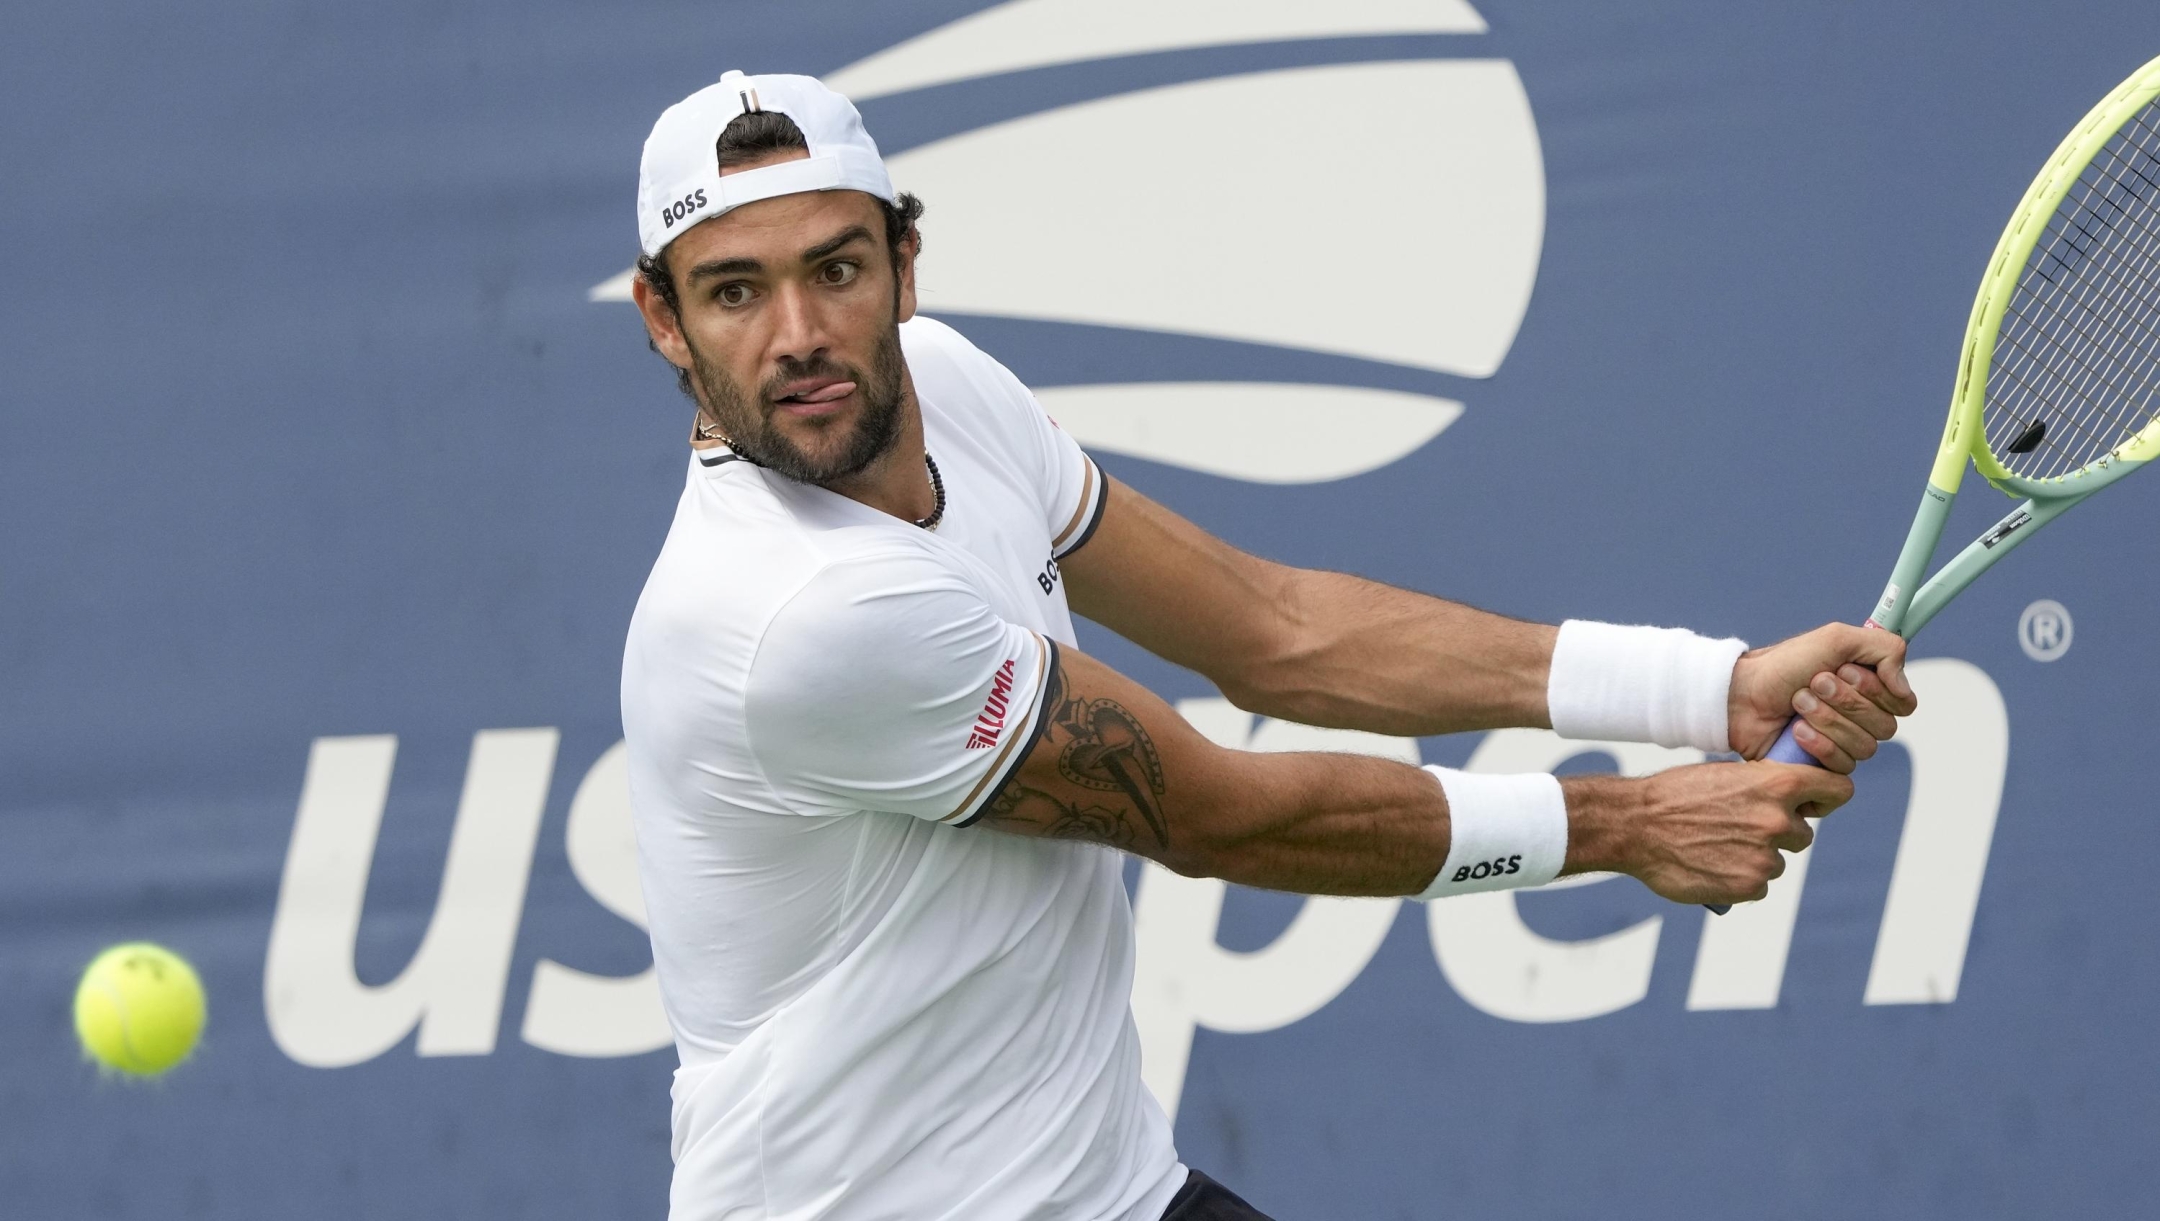 Matteo Berrettini, of Italy, returns a shot to Ugo Humbert, of France, during the first round of the U.S. Open tennis championships, Tuesday, Aug. 29, 2023, in New York. (AP Photo/Mary Altaffer)